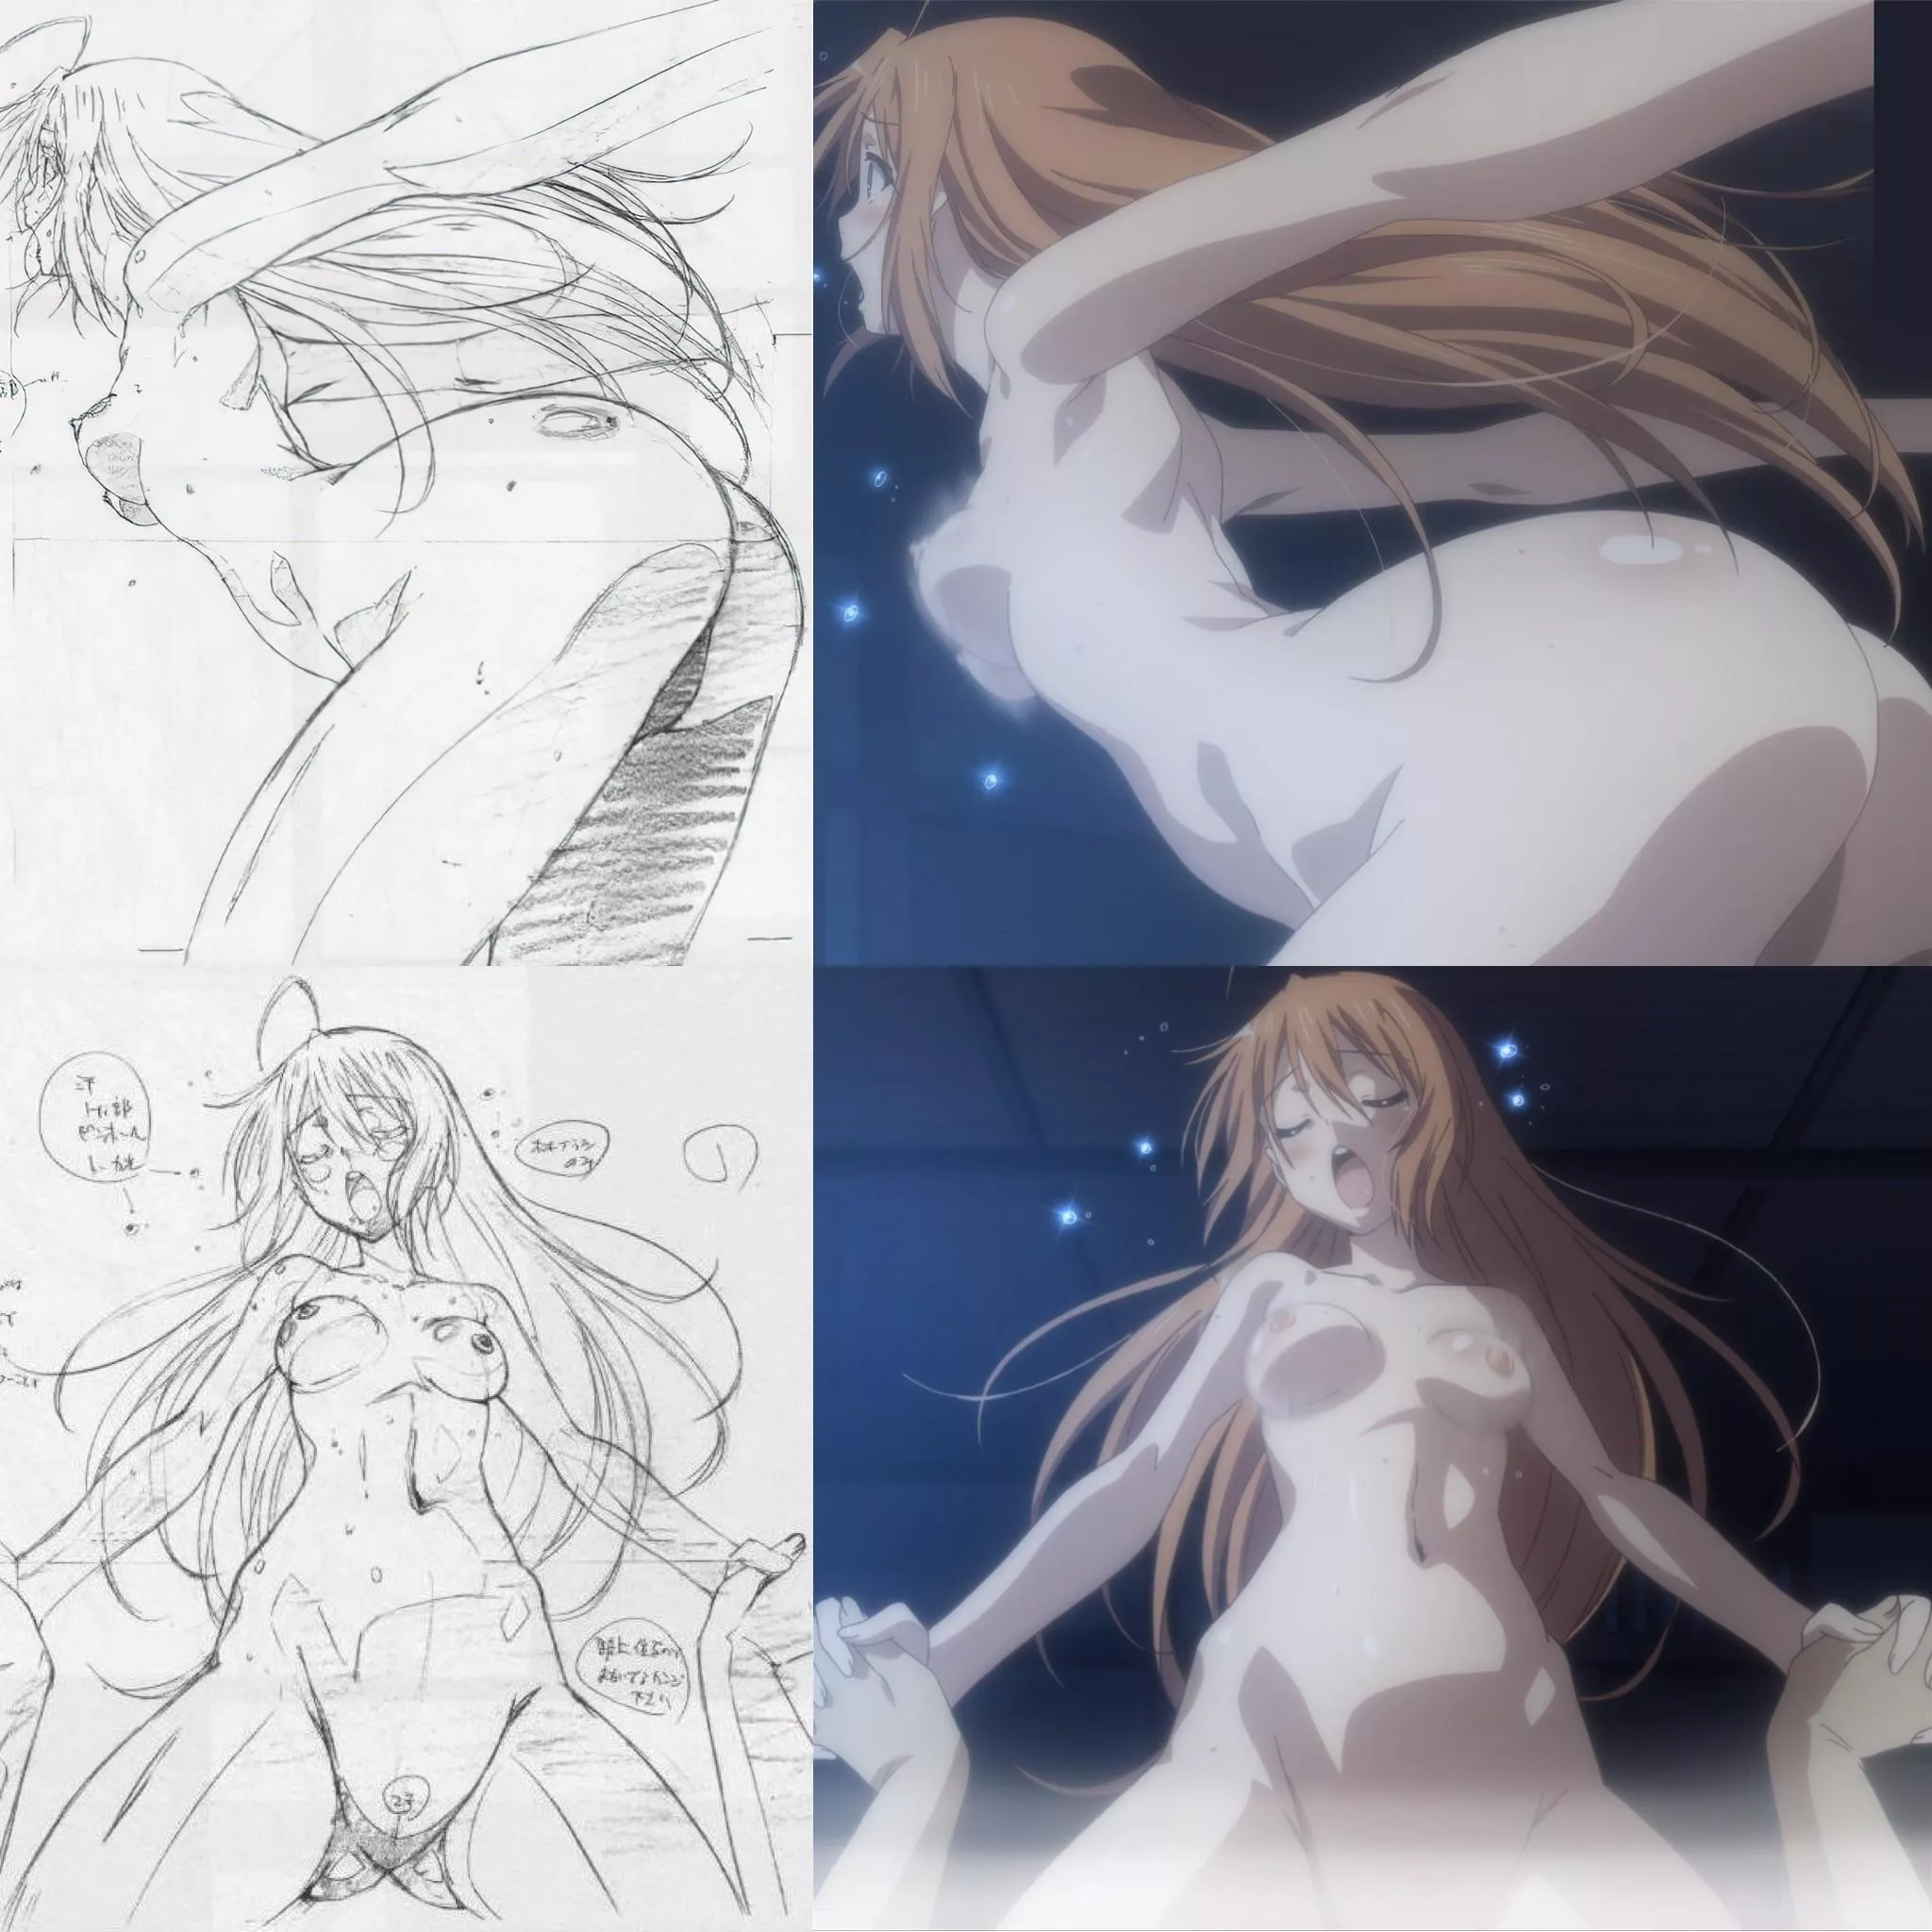 Sketch vs anime mayo chiki nudes in animeplot Onlynudes picture